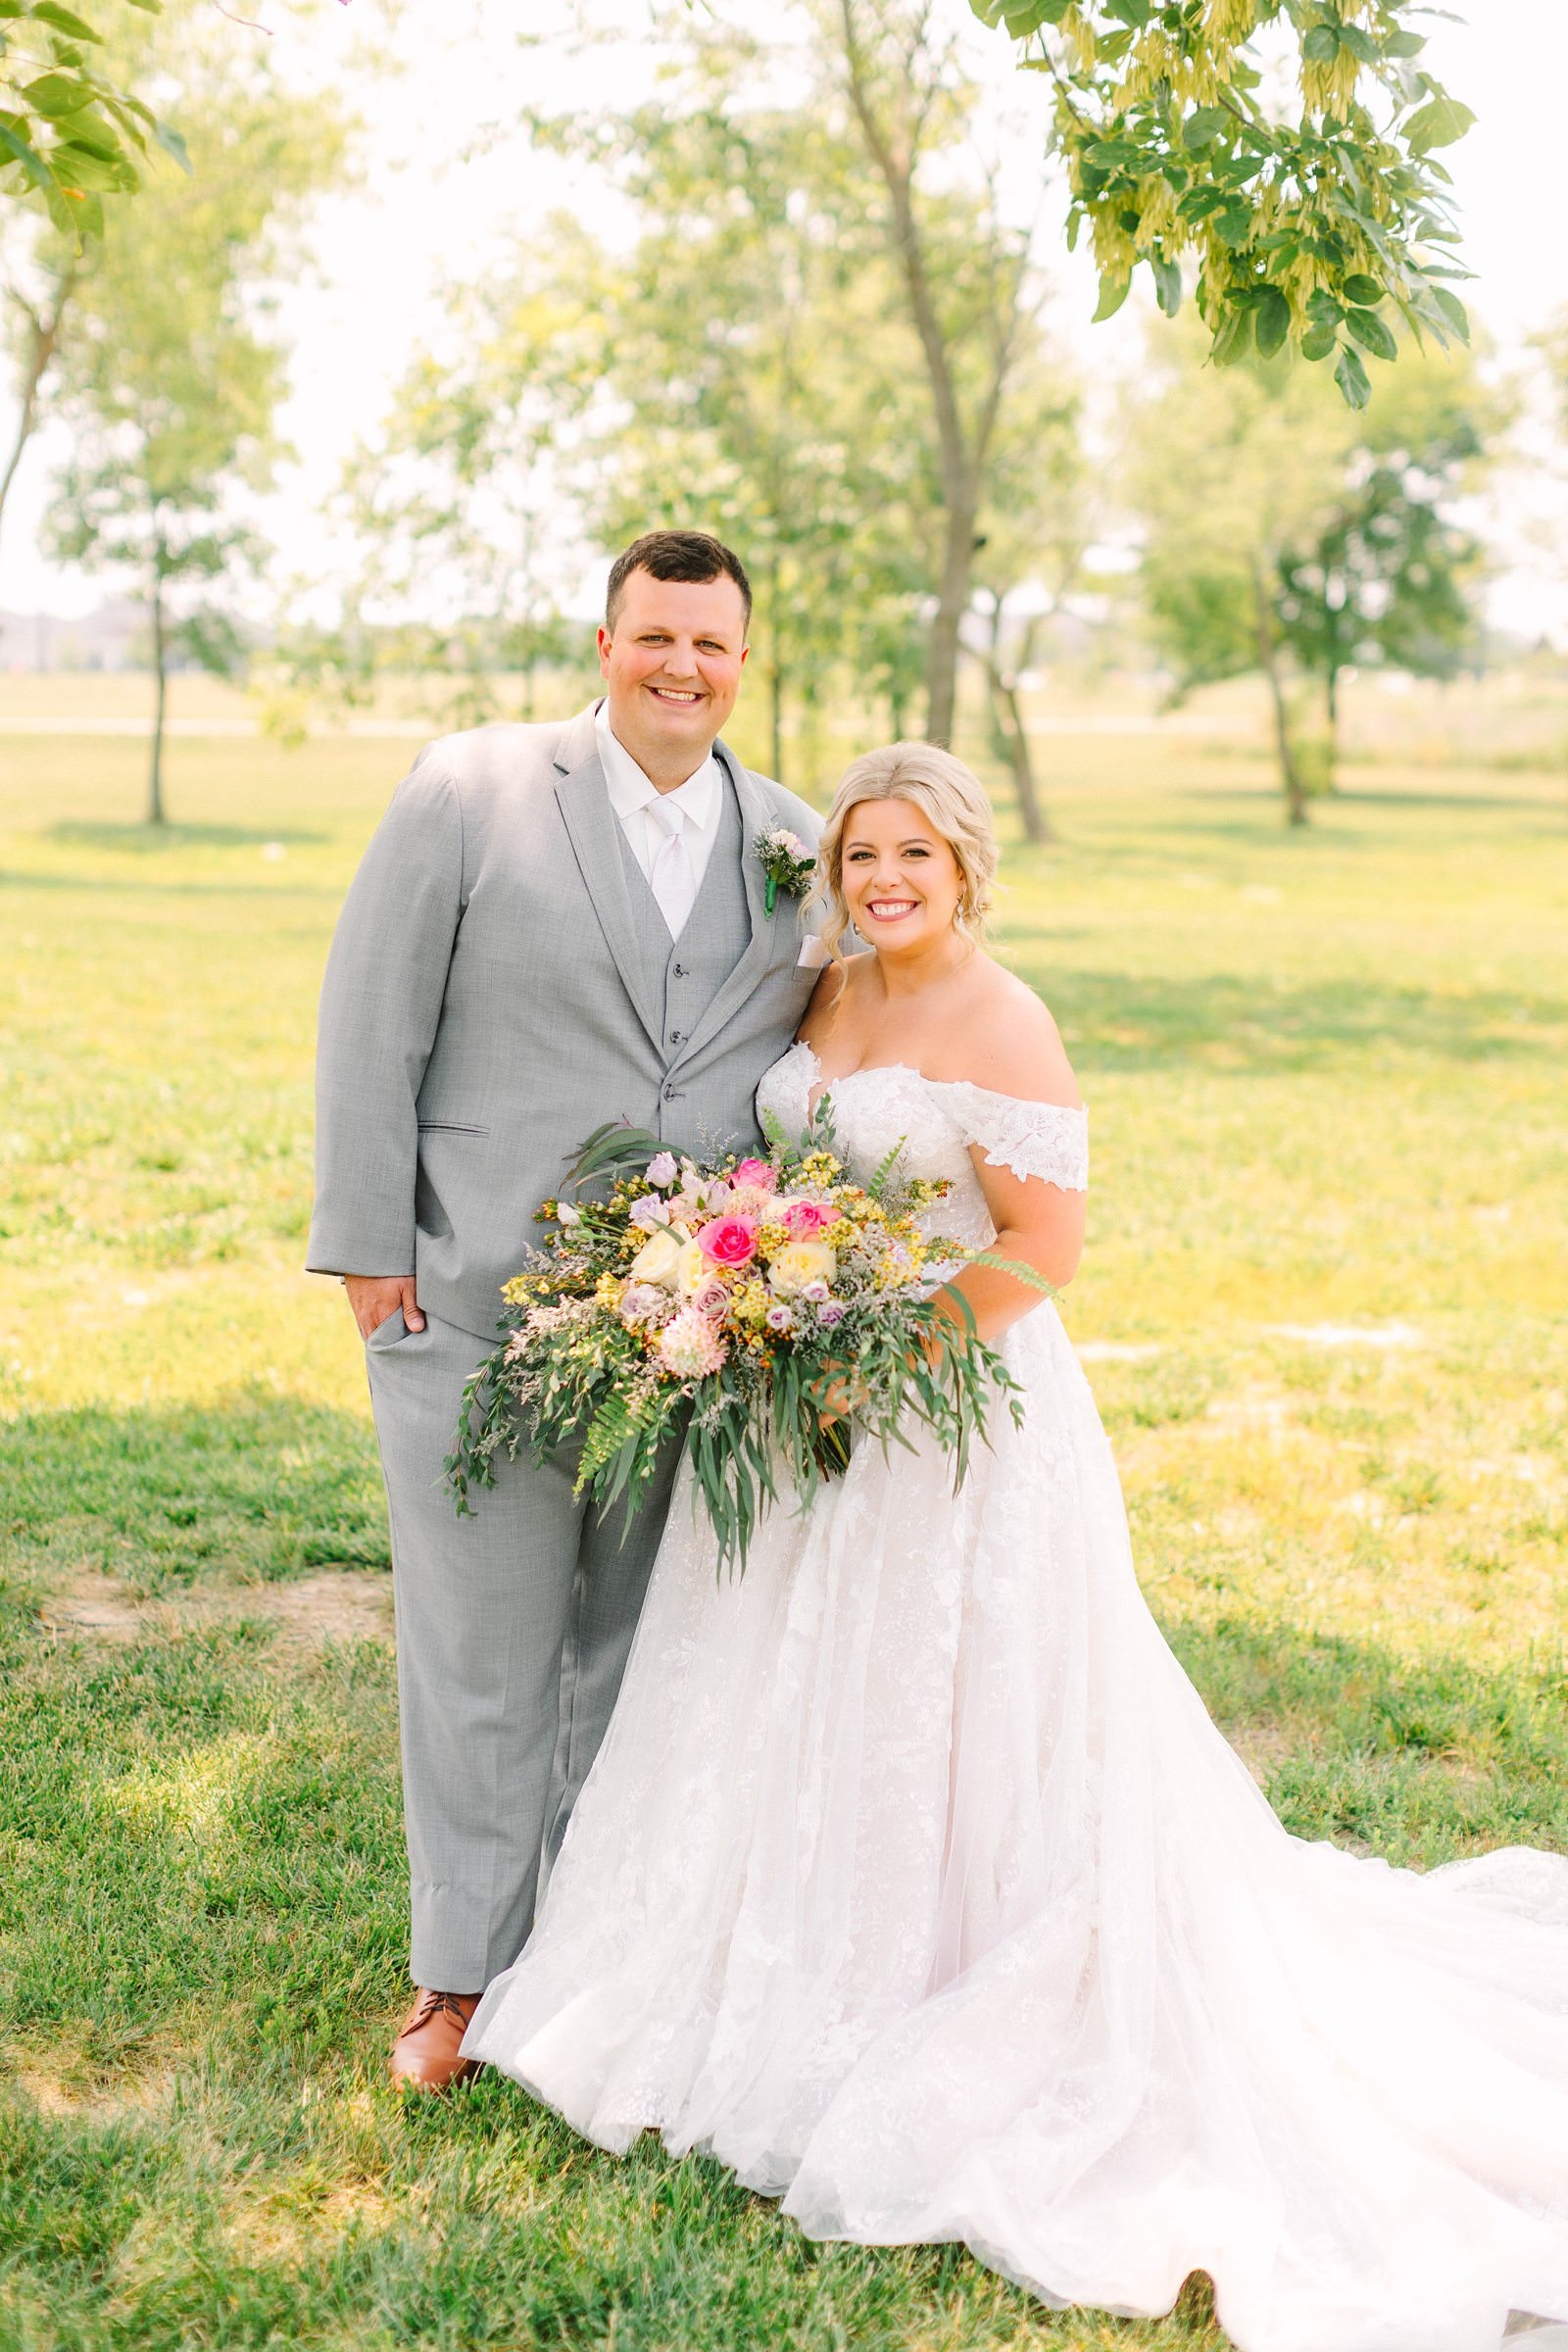 A Sunny Summer Wedding at Friedman Park in Newburgh Indiana | Paige and Dylan | Bret and Brandie Photography070.jpg